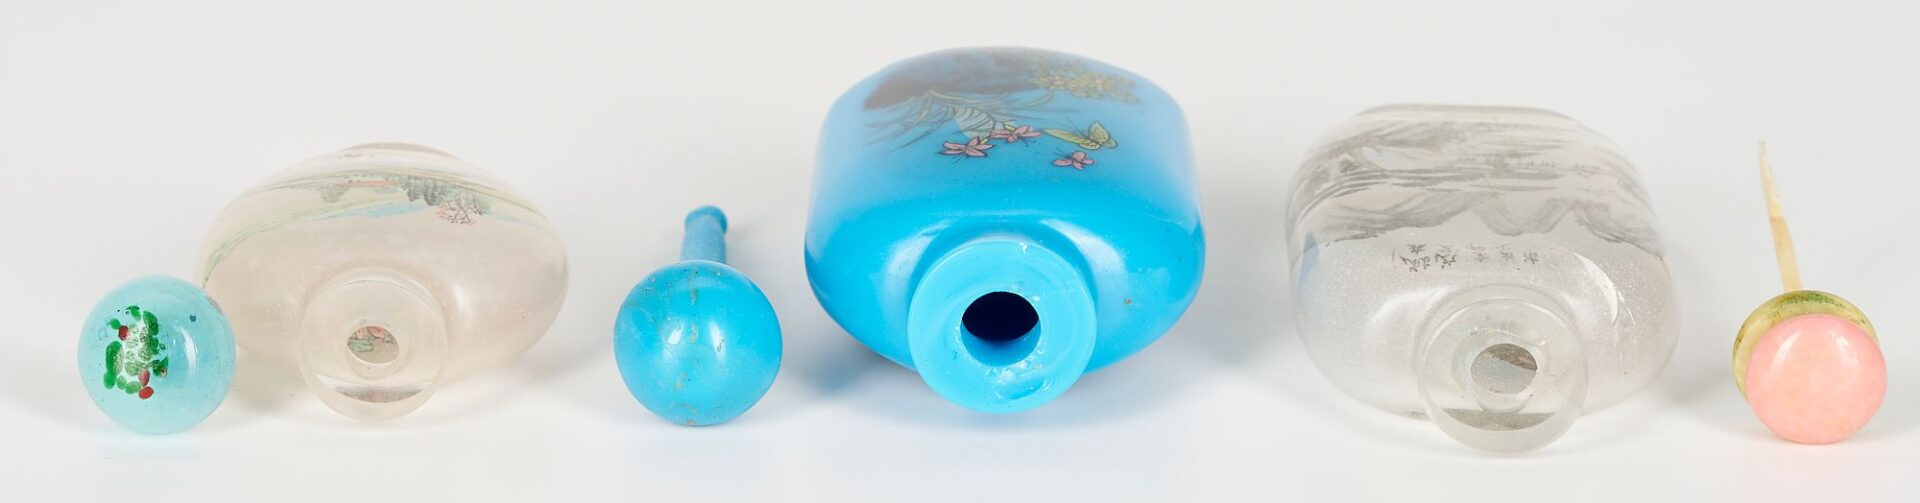 Lot 872: 3 Chinese Snuff Bottles, incl. Reverse Painted